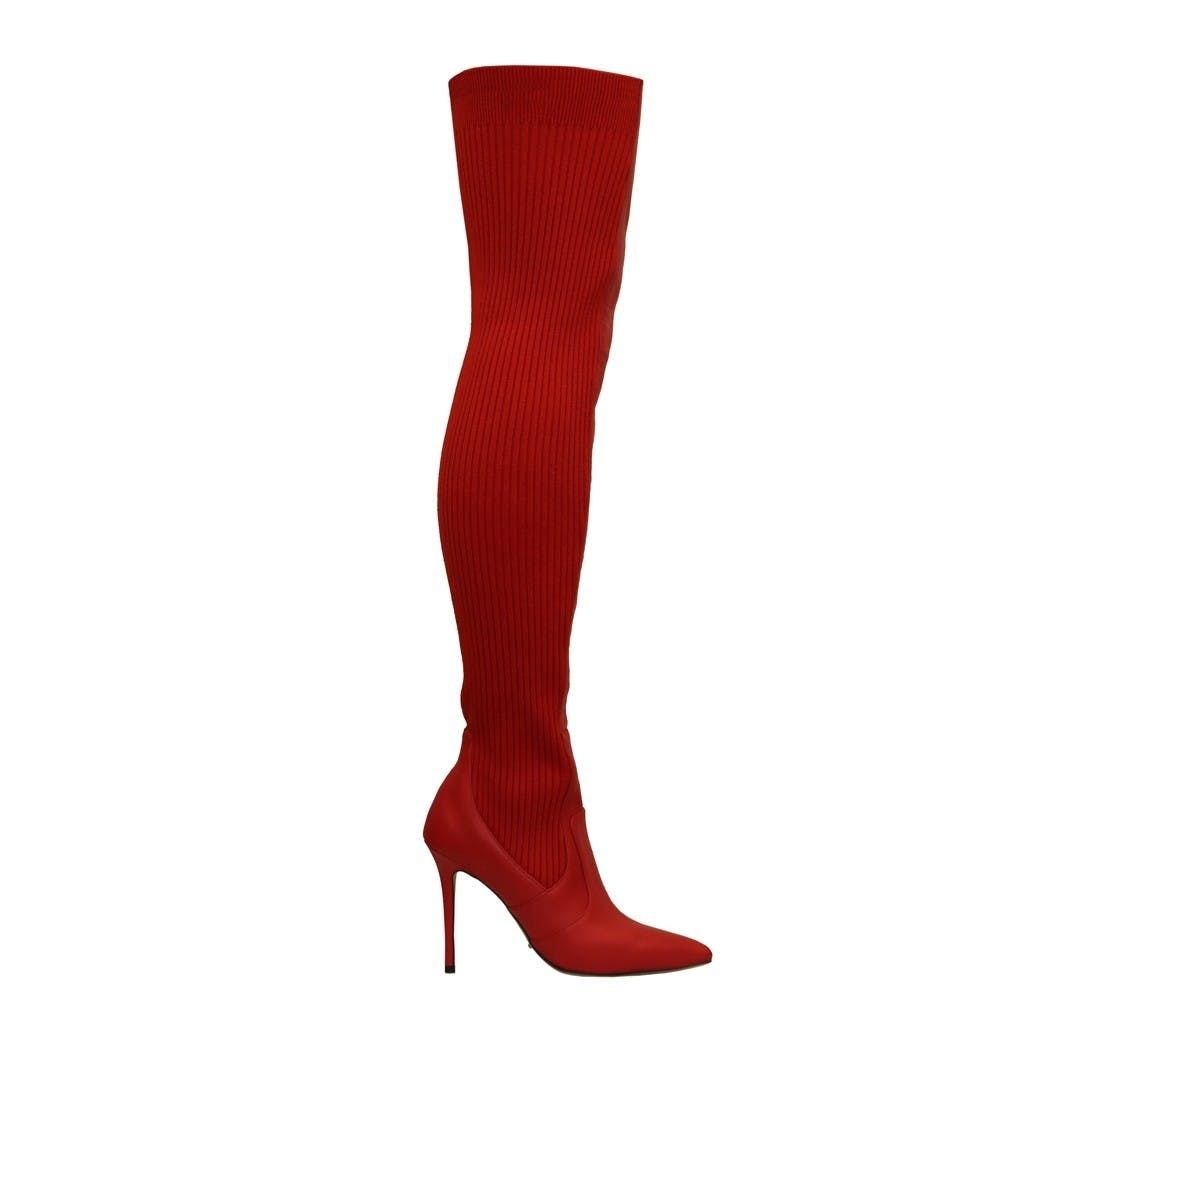 10 Over-the-Knee Boots That Go With Everything This Fall - Brit + Co